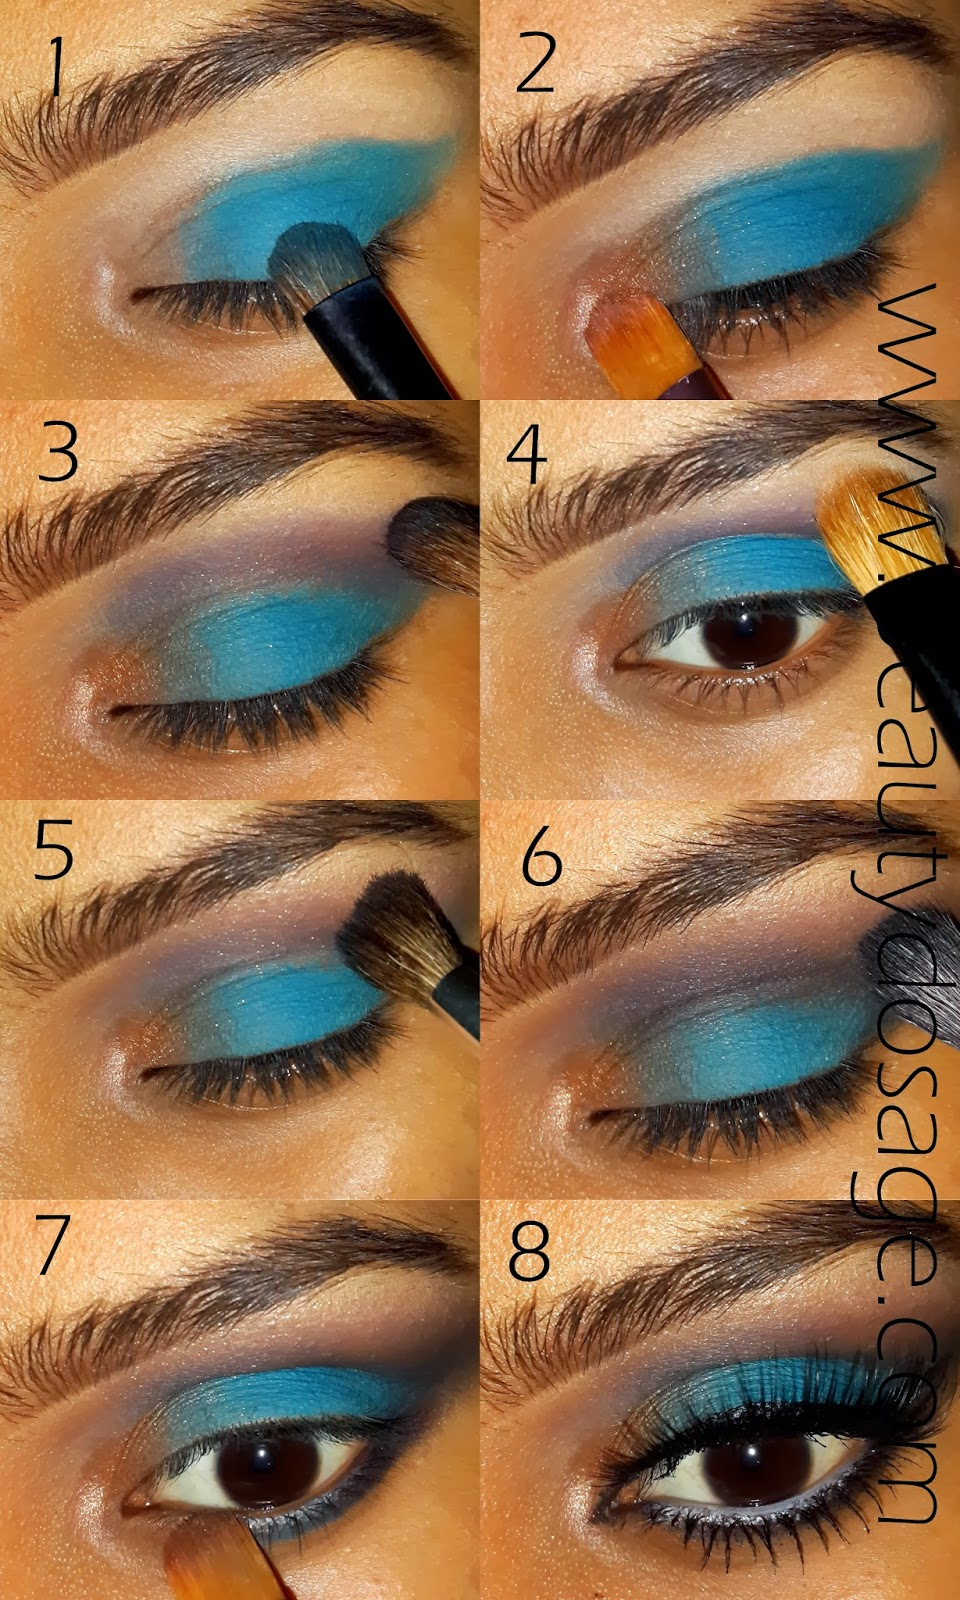 Gold Makeup For Blue Eyes Dark New Years Eve Makeup Blue And Gold Eye Makeup Make Up For